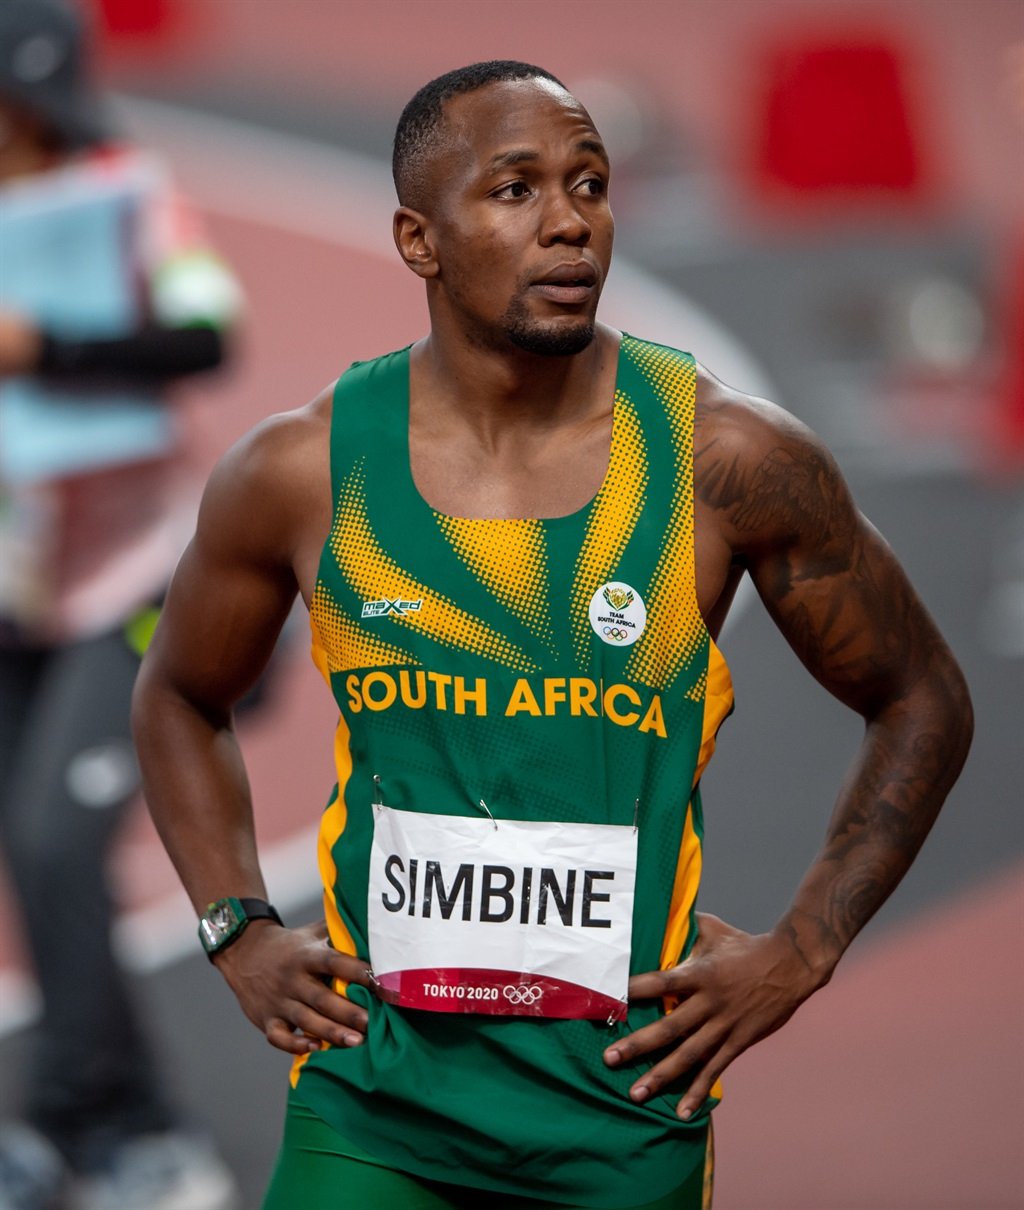 Akani Simbine of South Africa.
(Photo by Anton Geyser/Gallo Images)